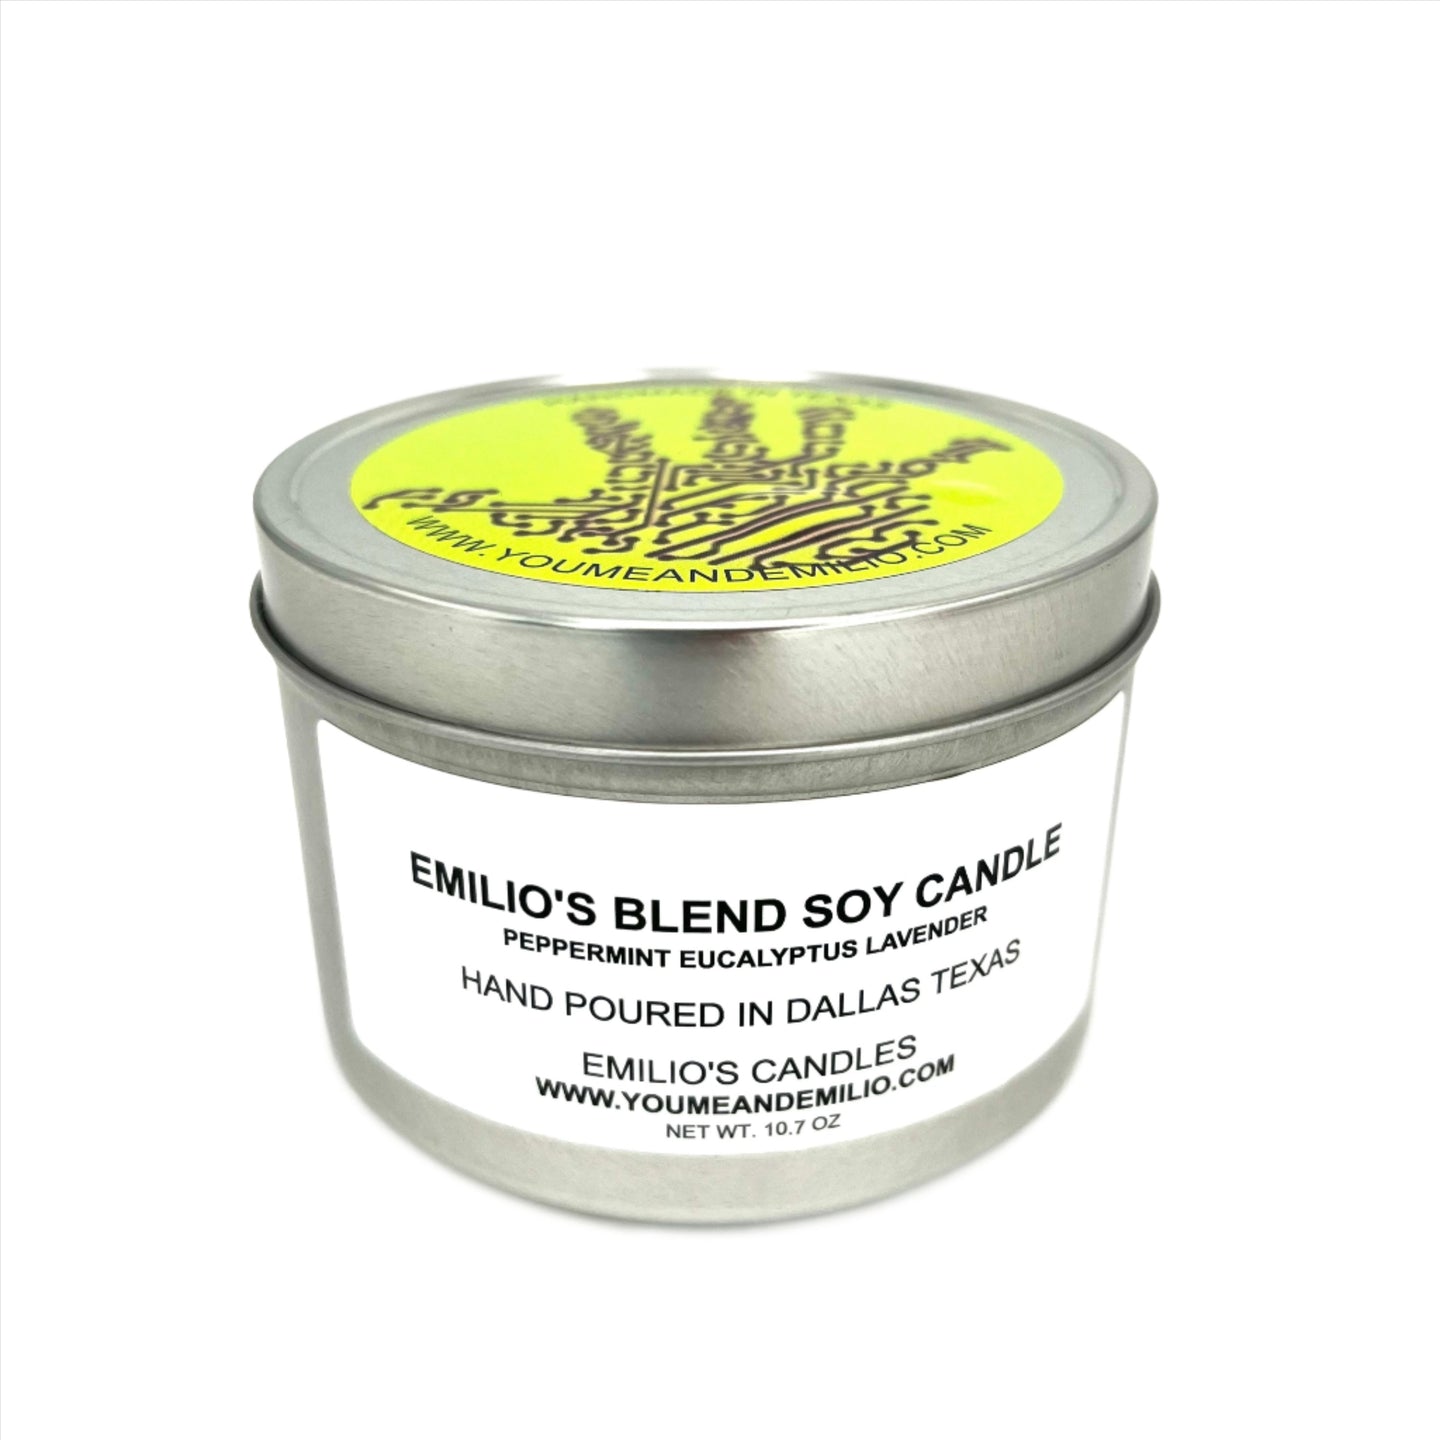 Emilio's Blend Soy Candle